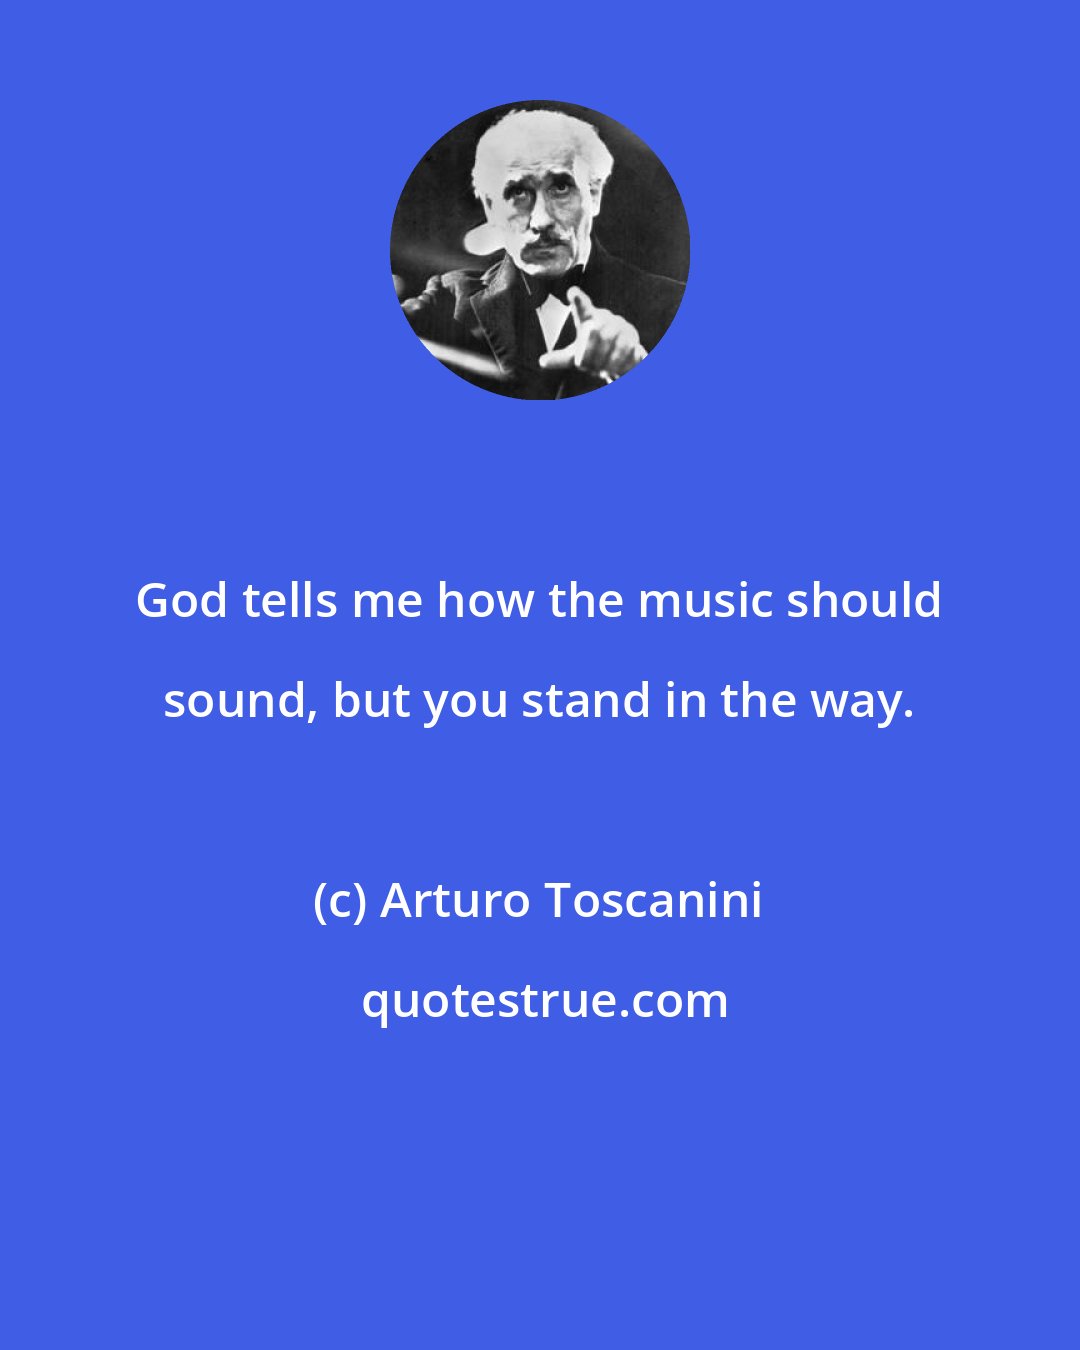 Arturo Toscanini: God tells me how the music should sound, but you stand in the way.